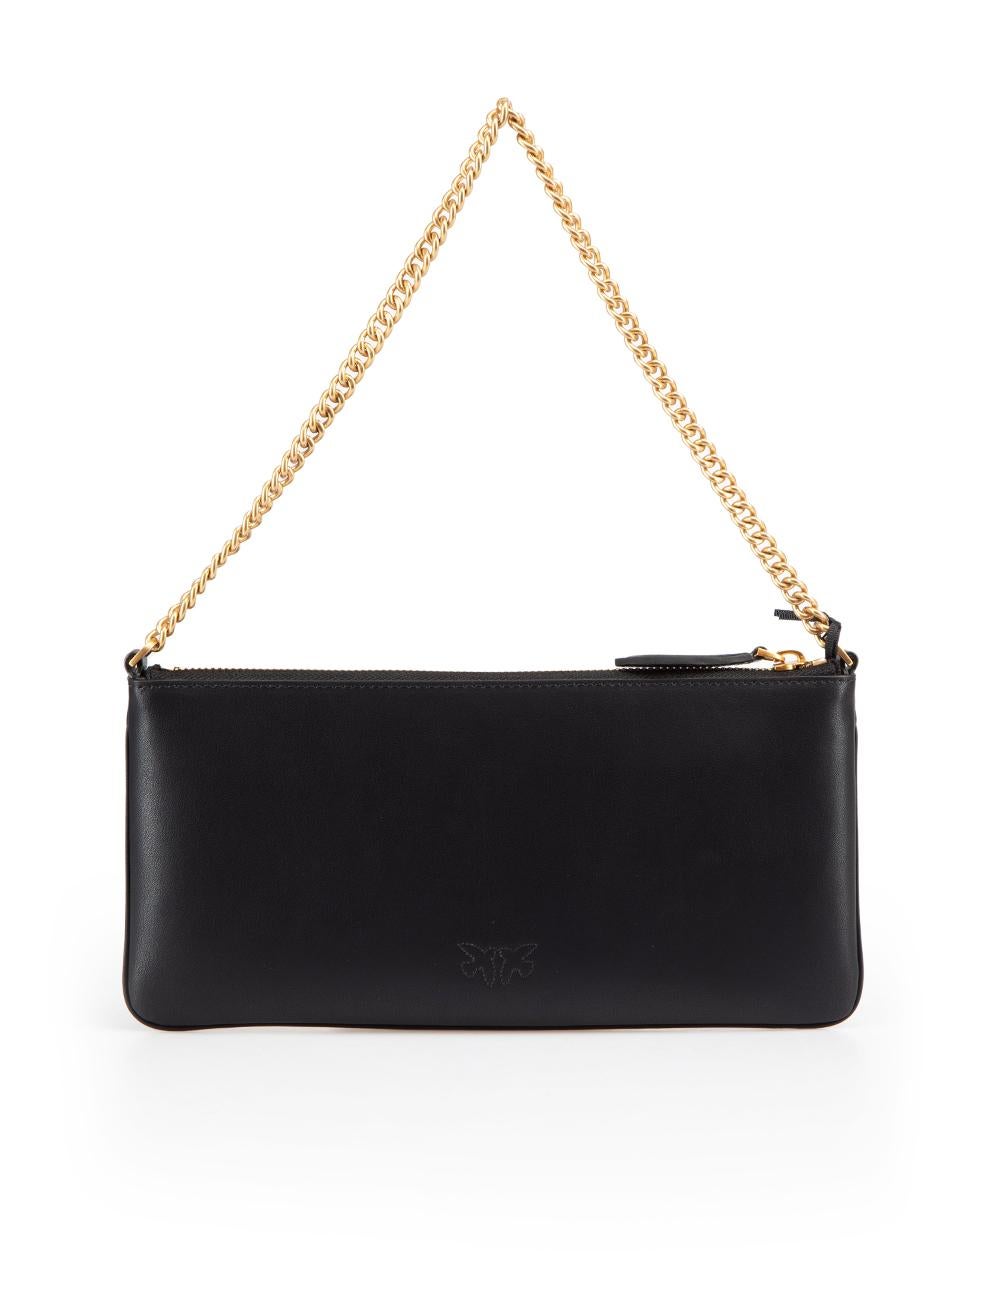 Pinko SS24 Black Leather Horizontal Flat Shoulder Bag In New Condition For Sale In London, GB